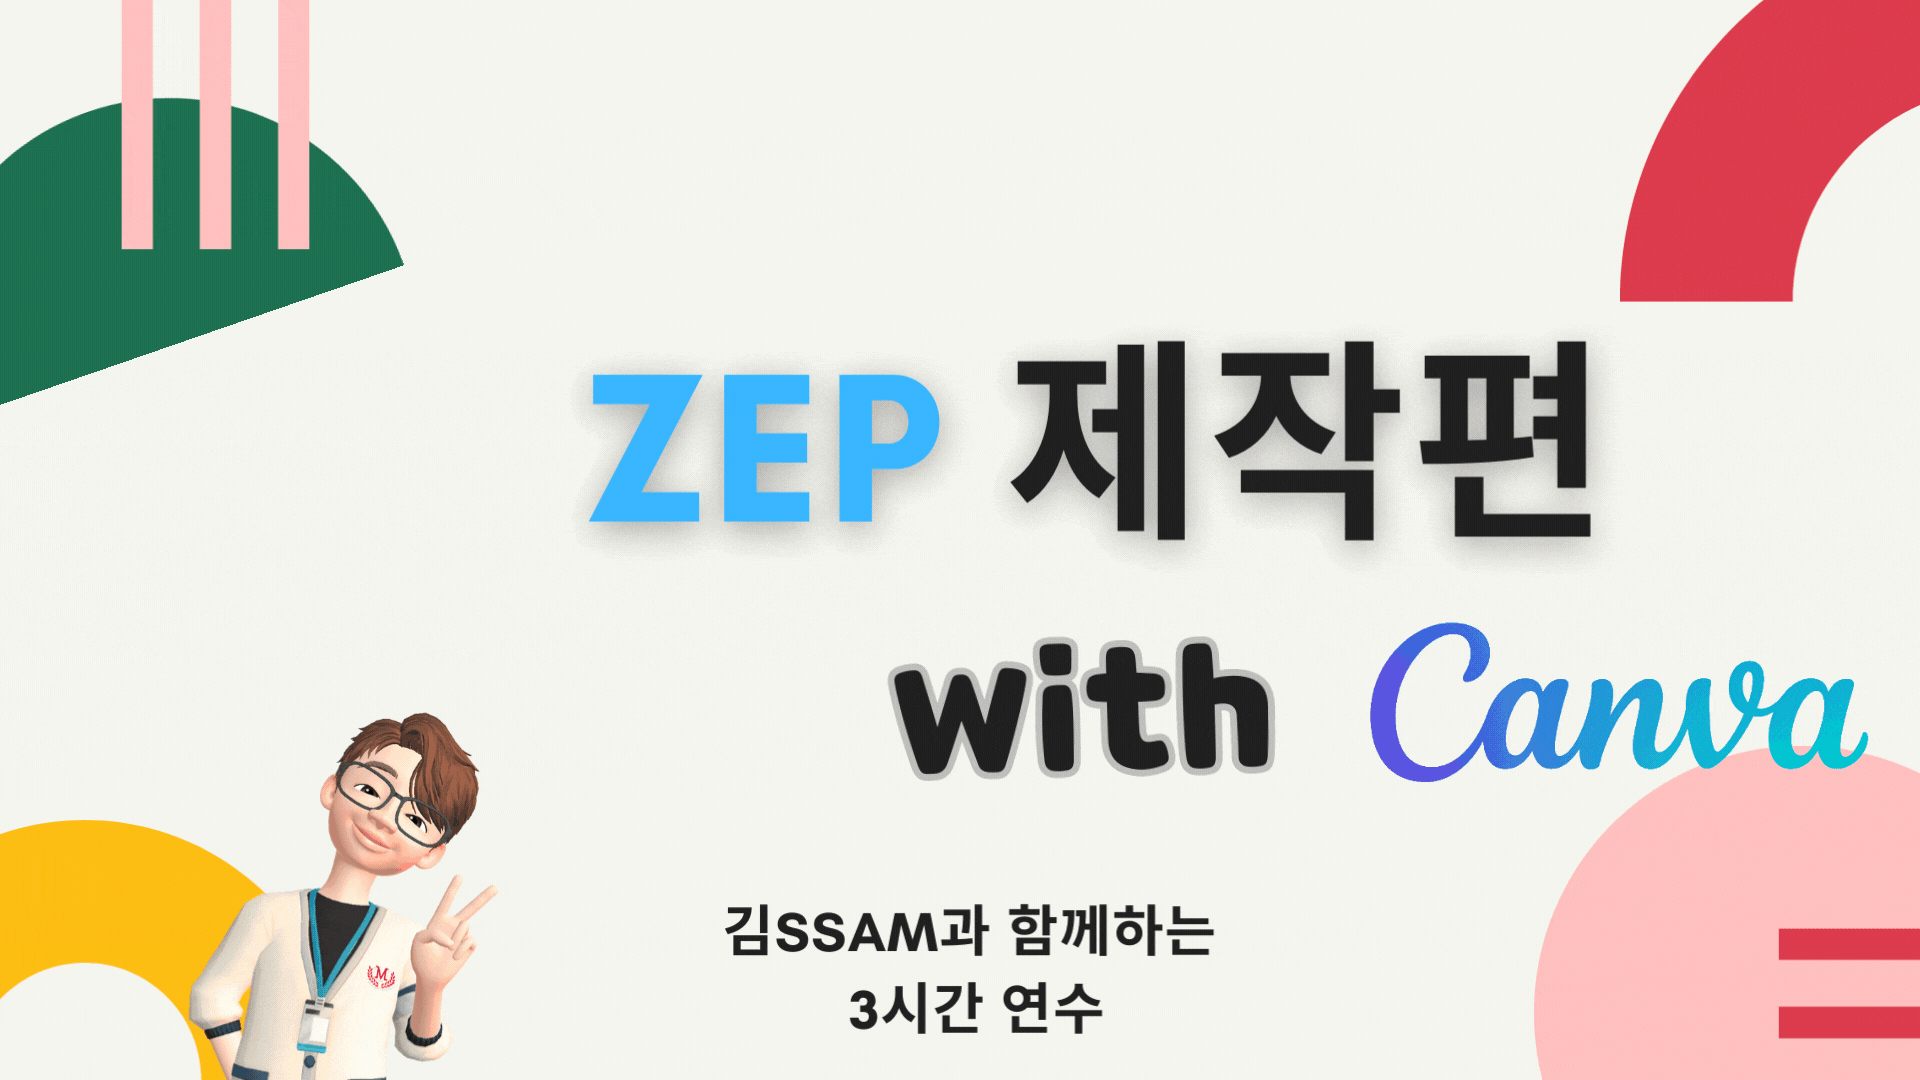 ZEP 제작편 With Canva